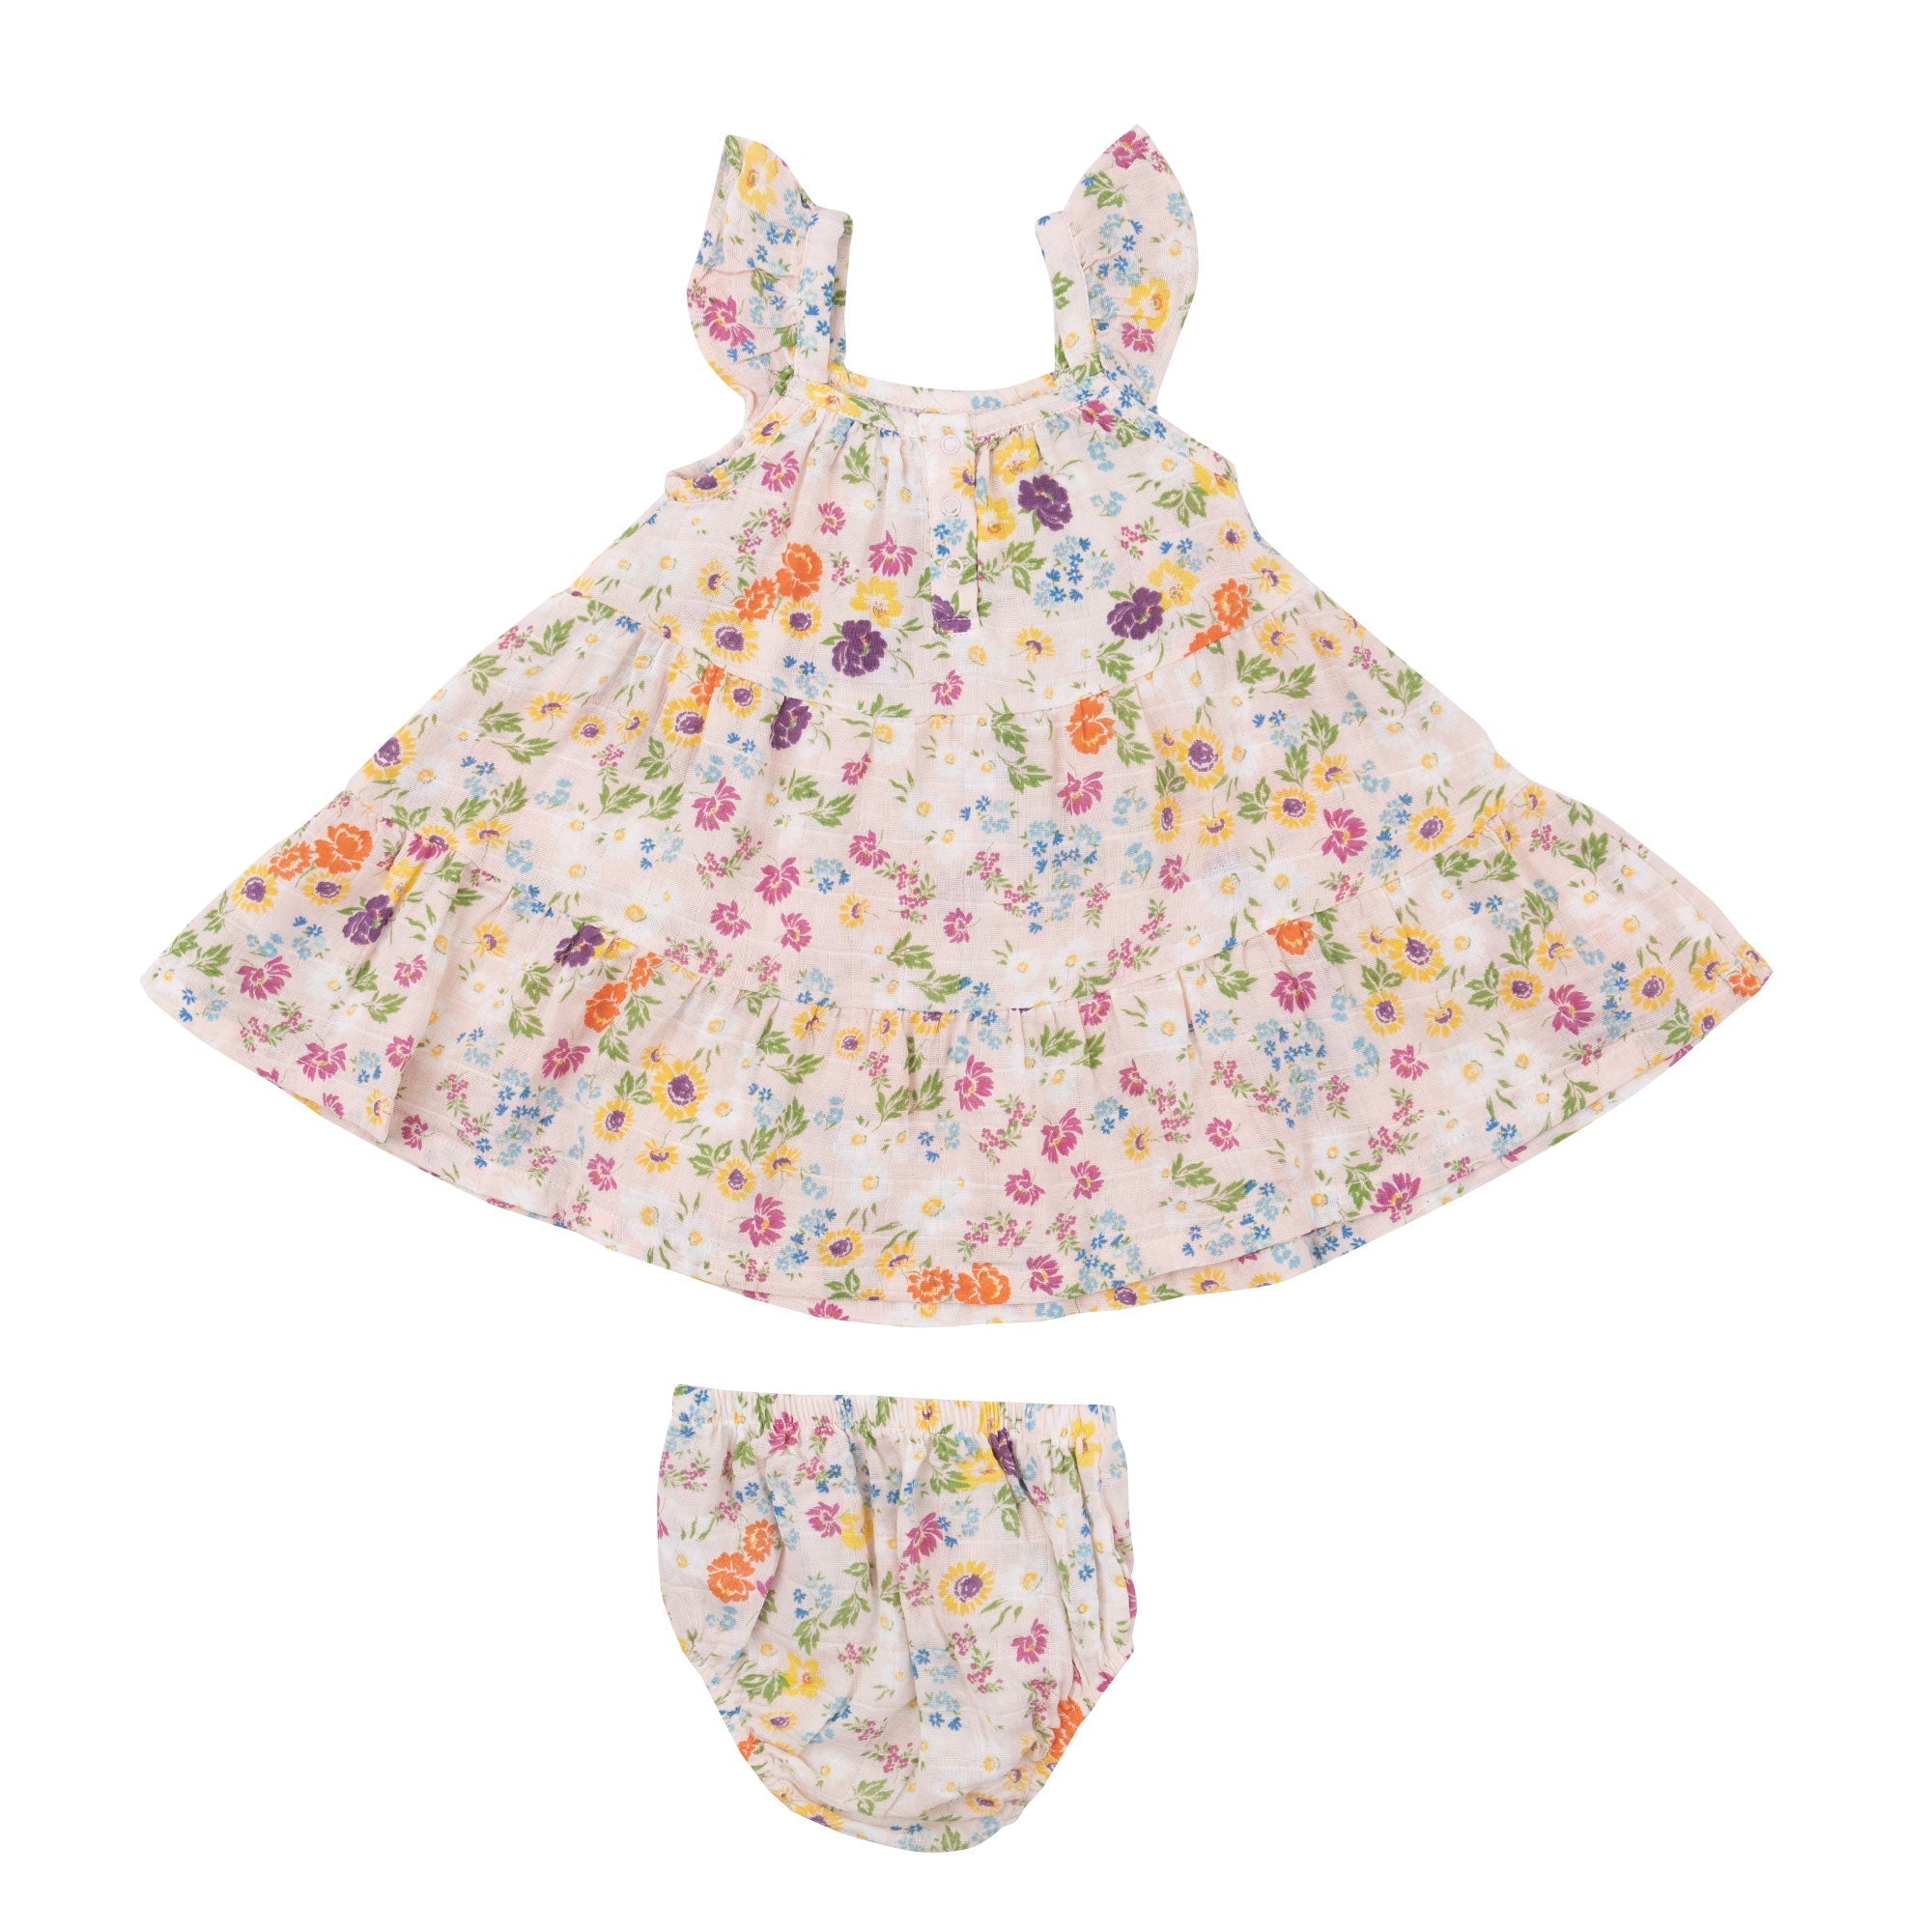 Twirly Sundress & Diaper Cover - Cheery Mix Floral